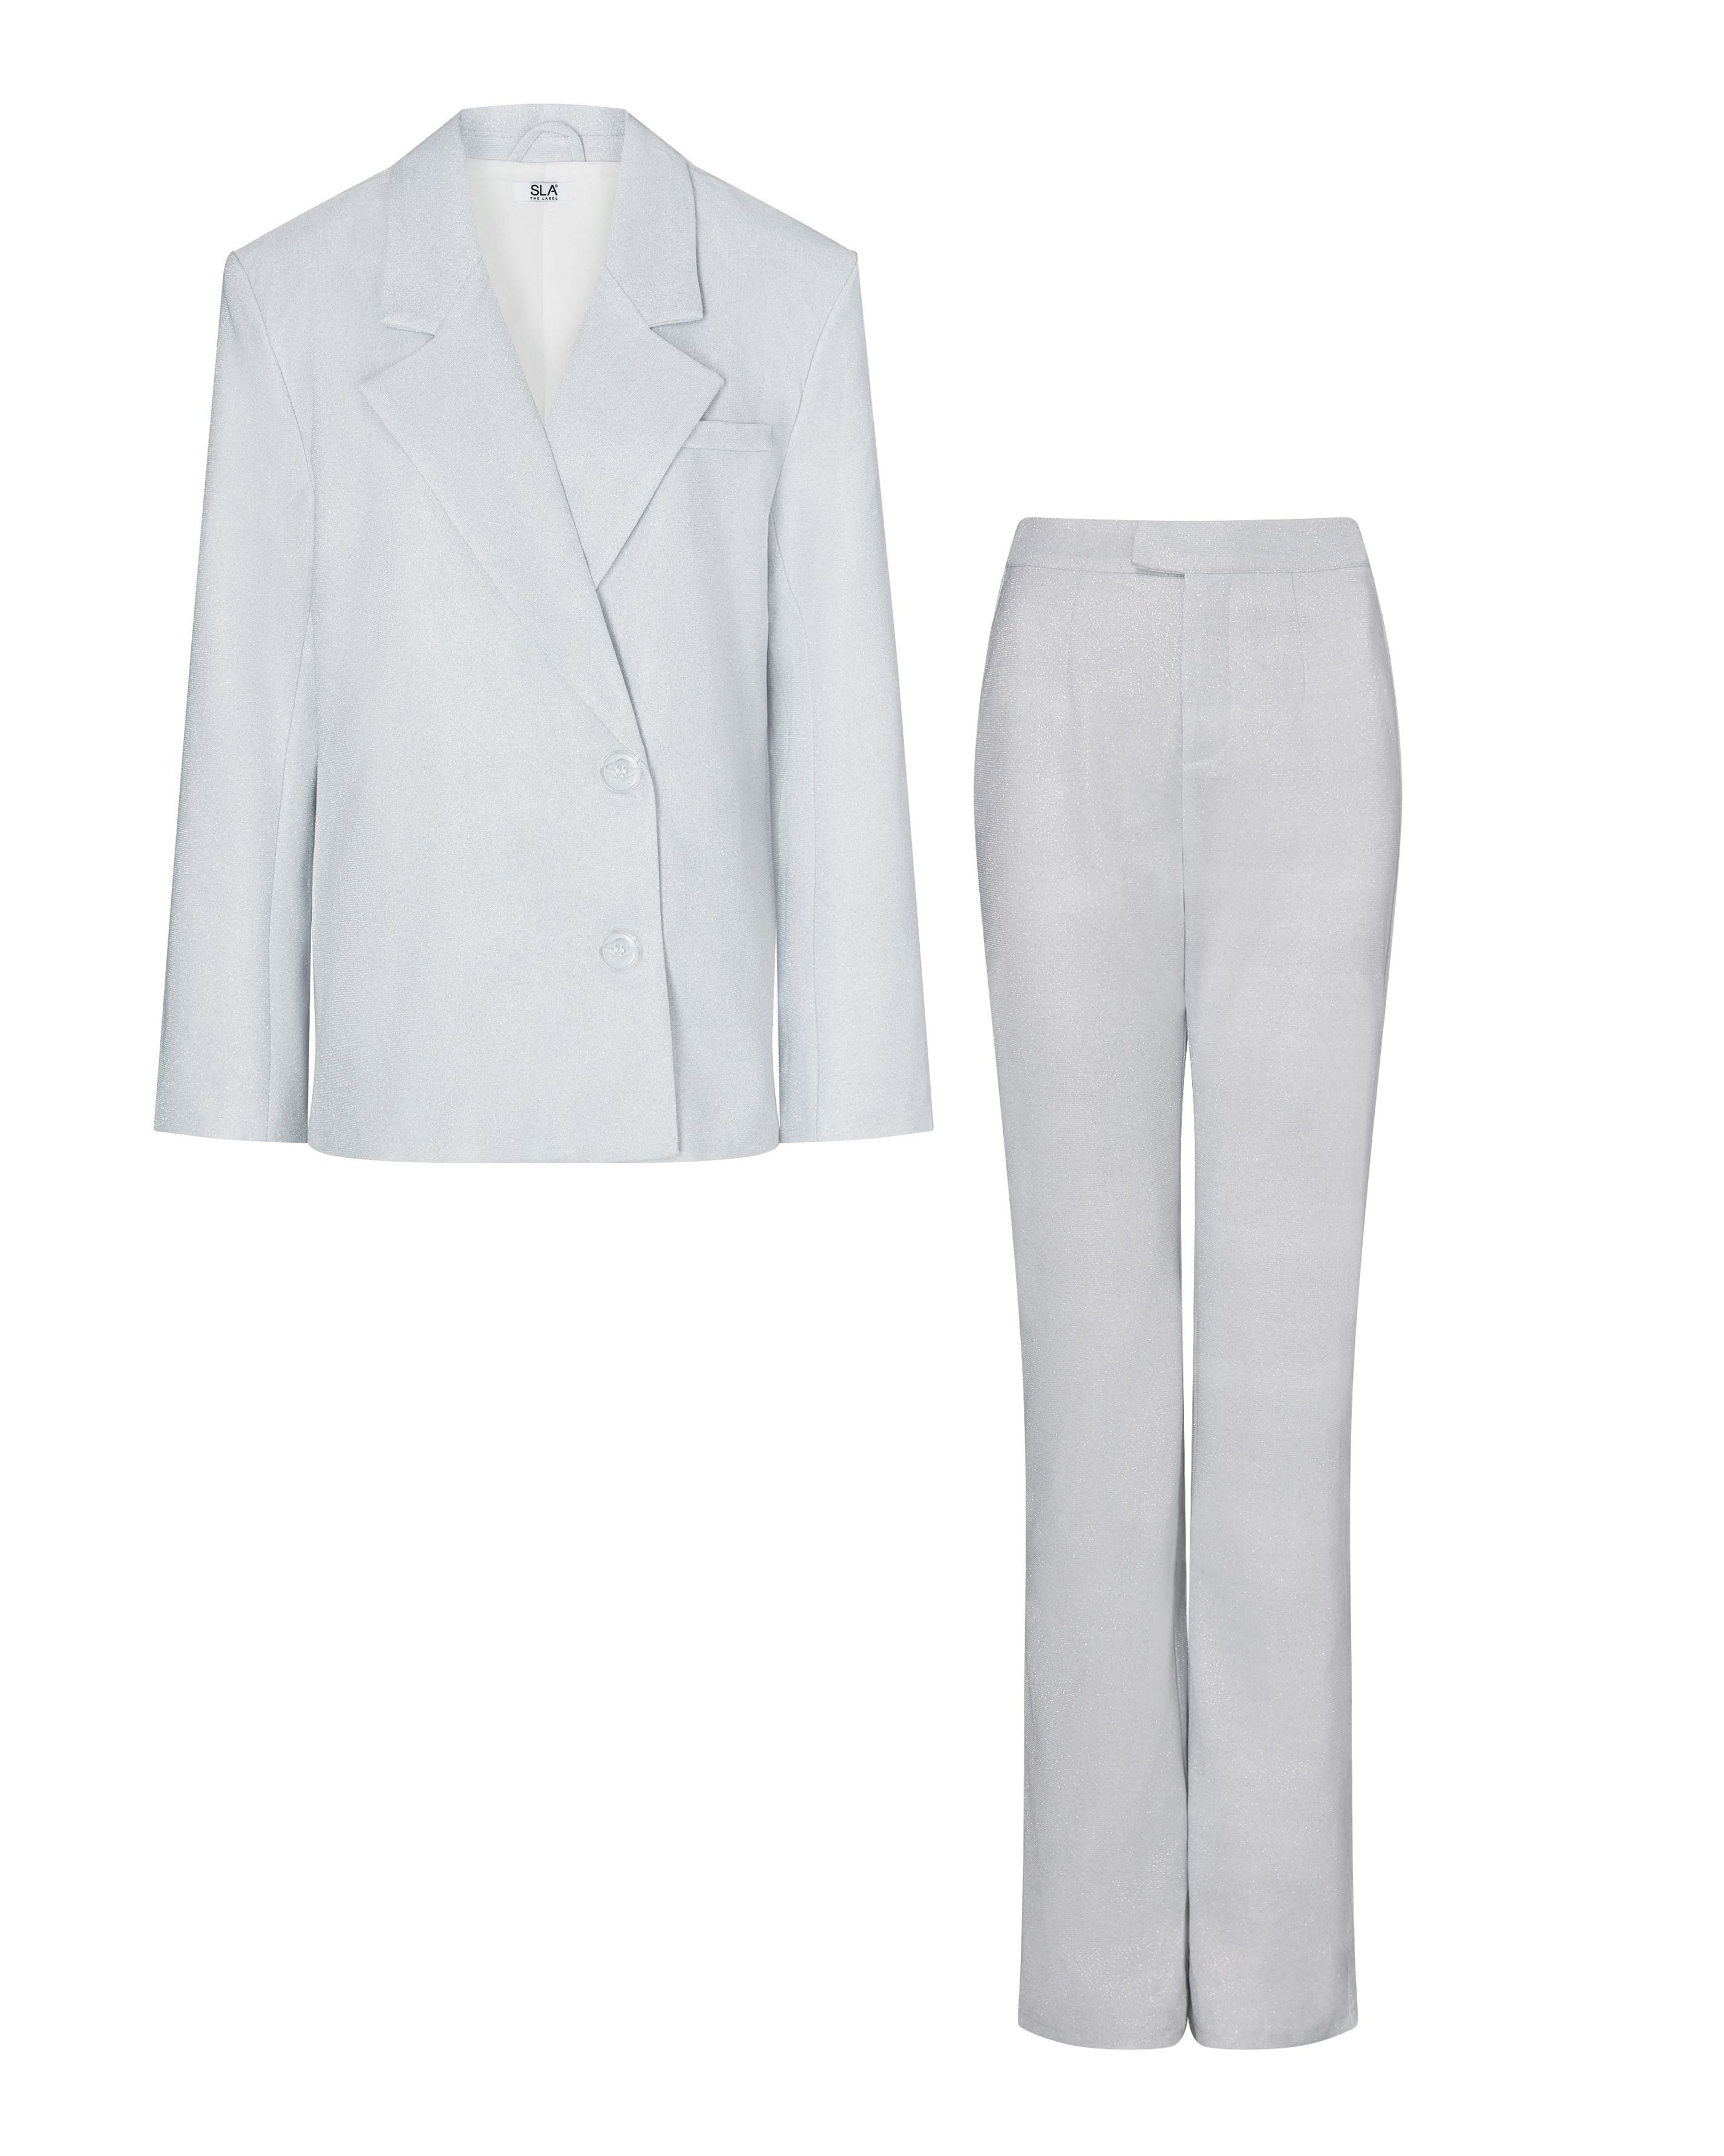 The 10 Best Womens Pant Suits For Every Social Event